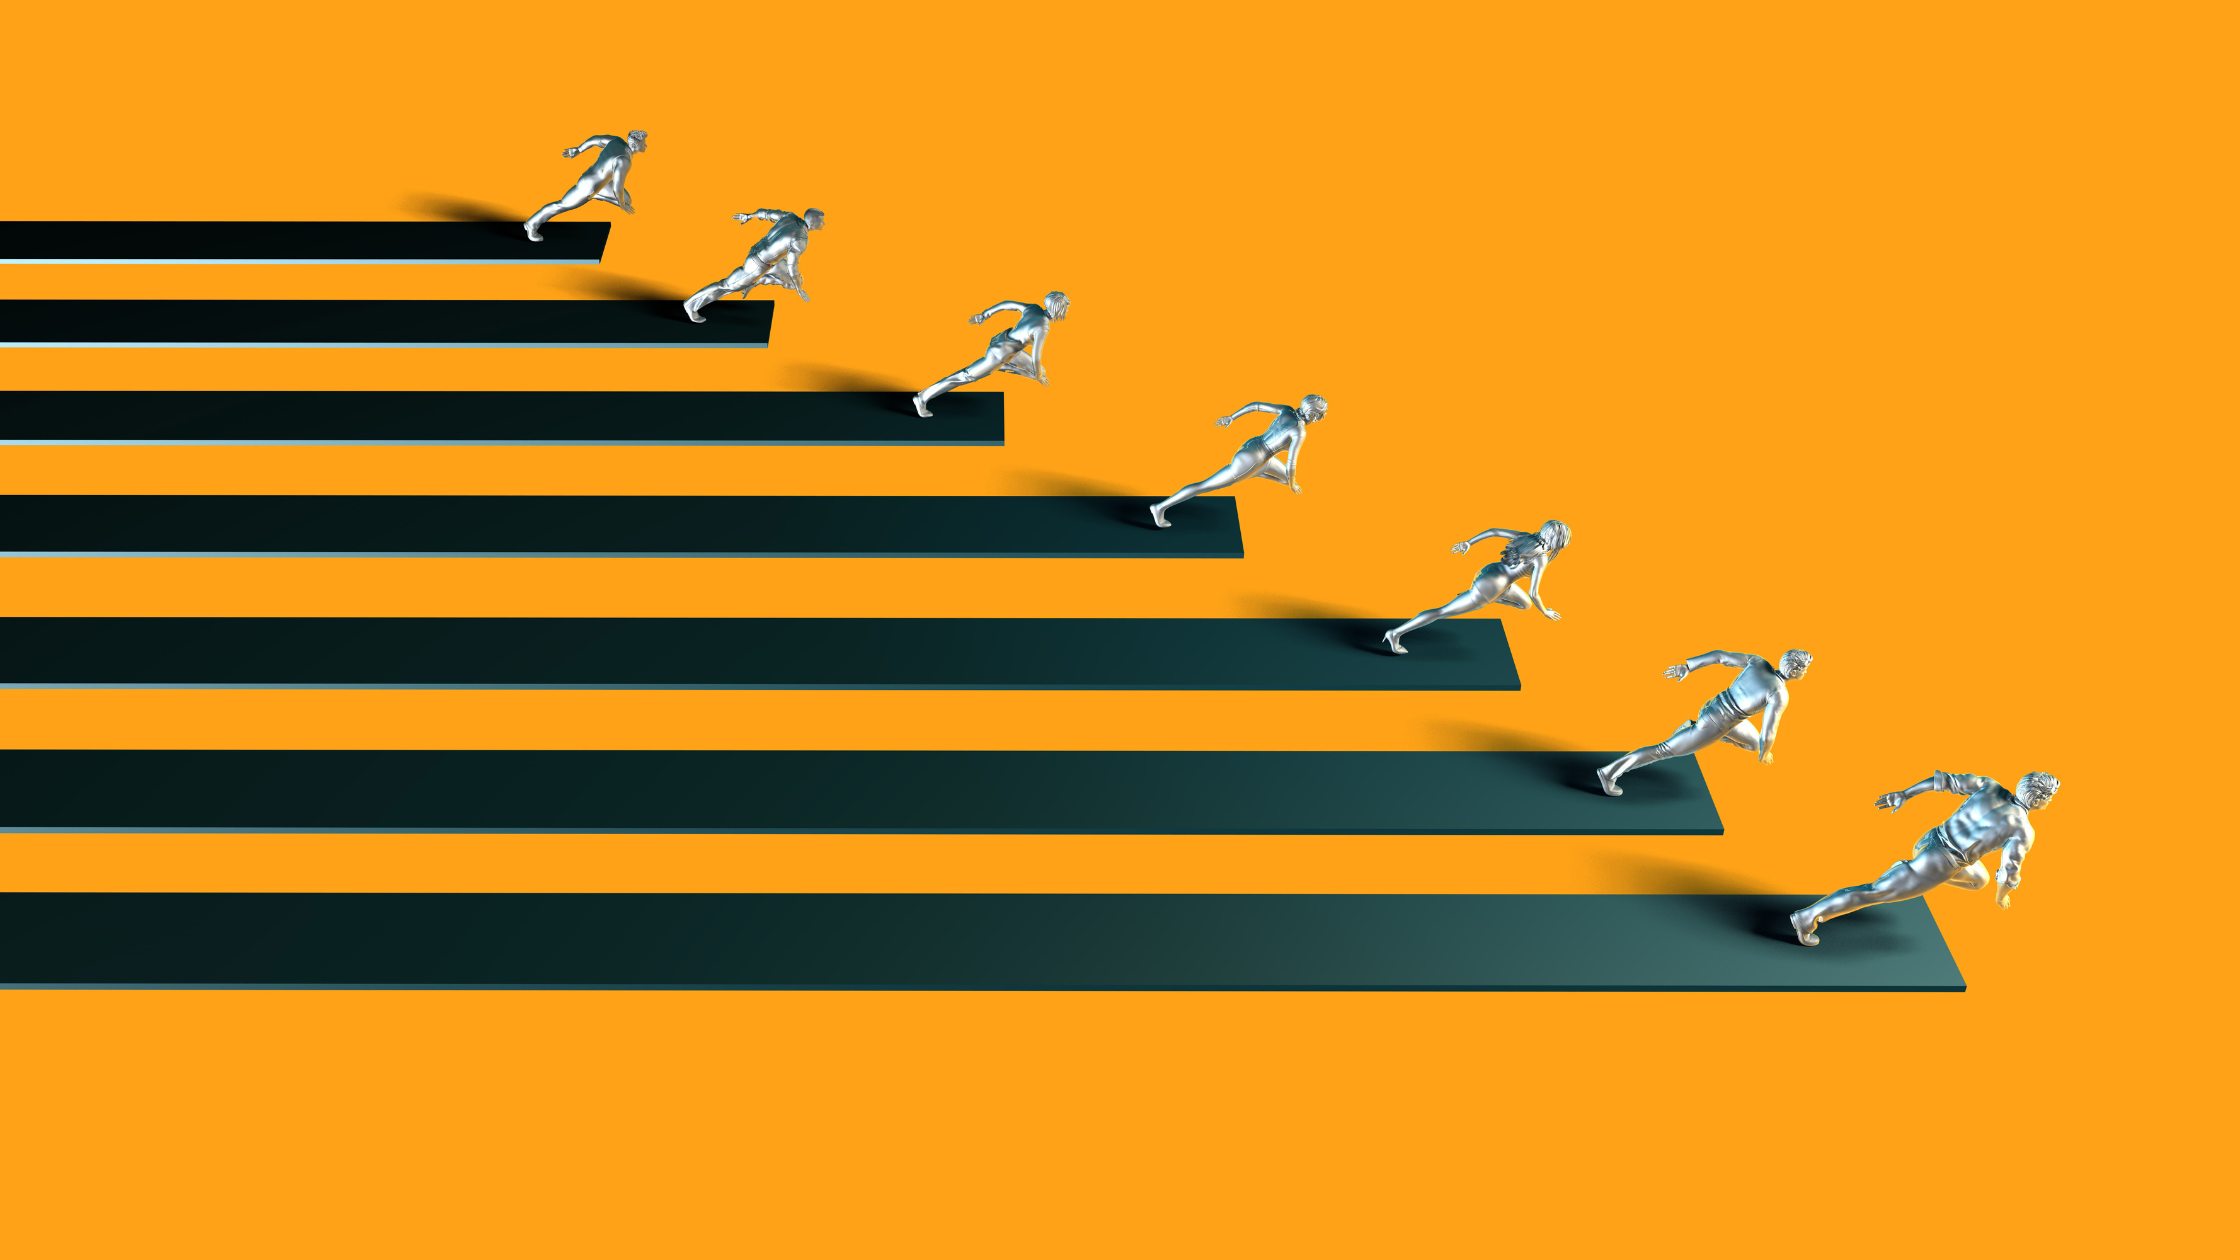 An illustration of silver figures running with black lines behind them on a yellow background